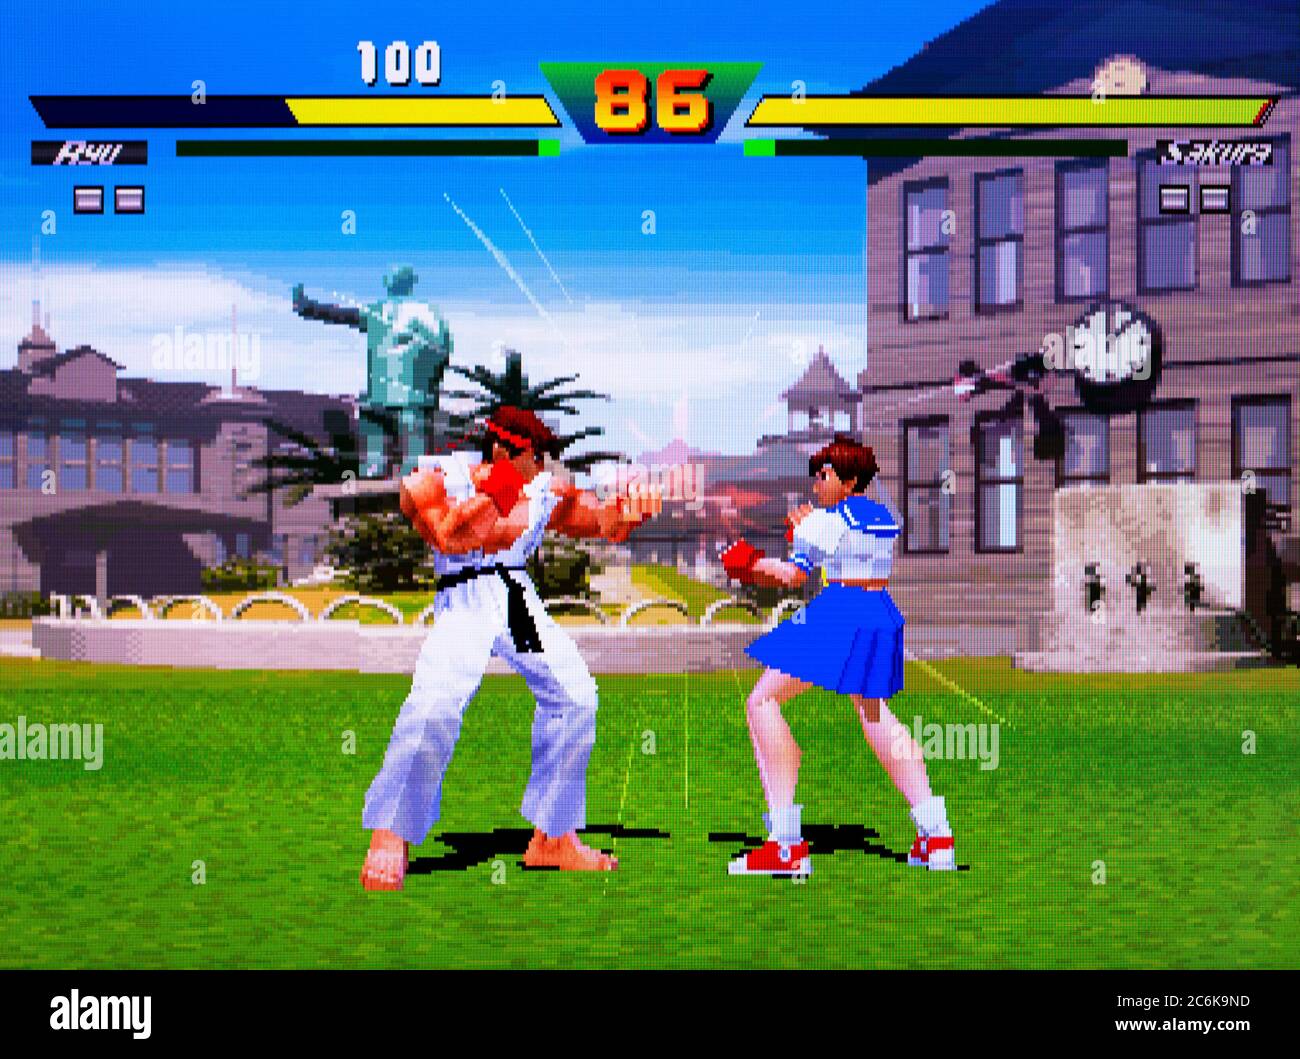 Street Fighter Collection - Sony Playstation 1 PS1 PSX - Editorial use only  Stock Photo - Alamy